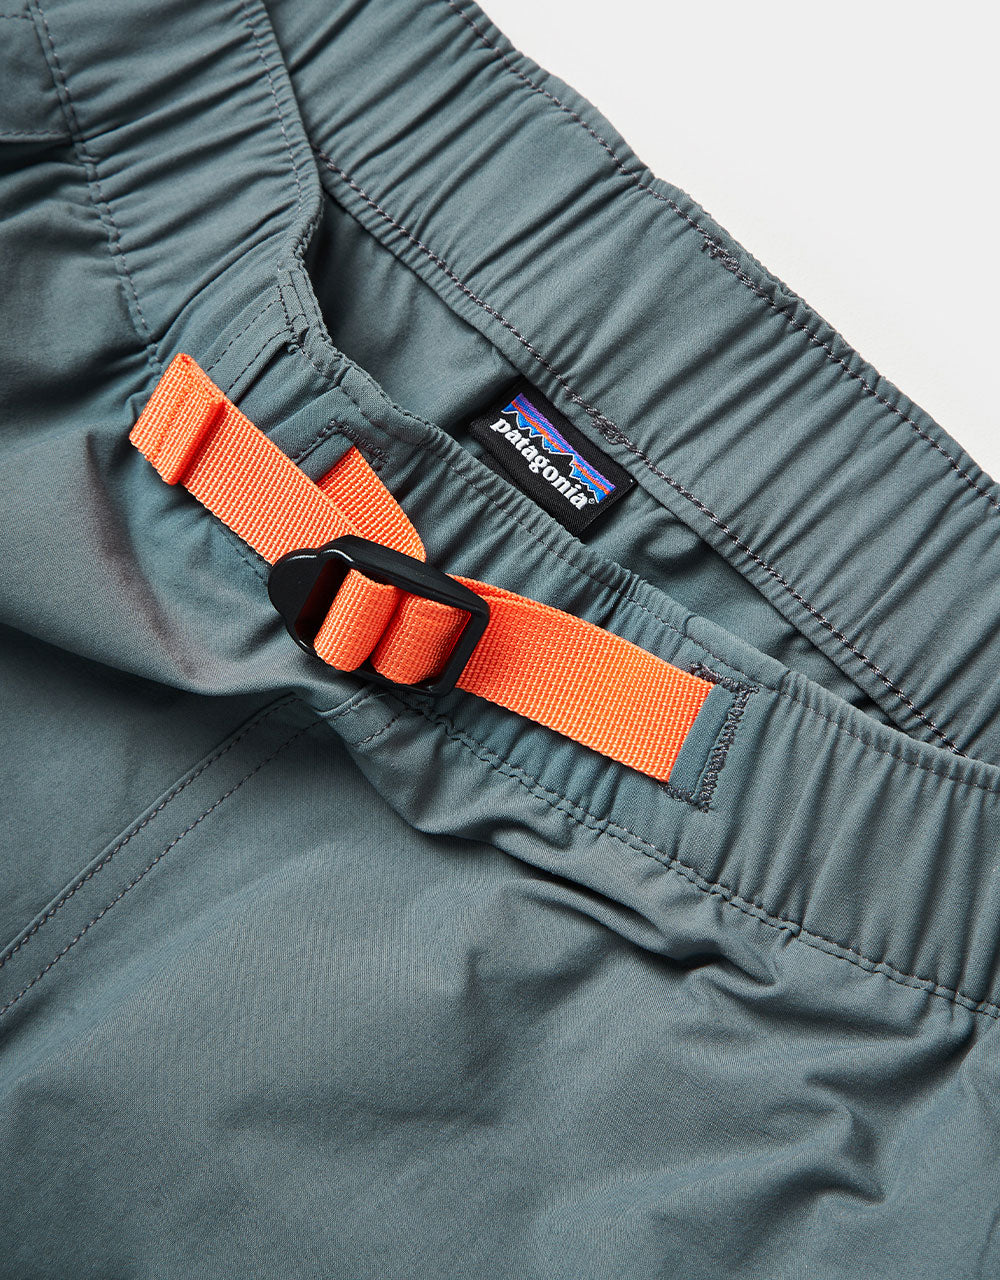 Patagonia Outdoor Everyday Pant - Nouveau Green